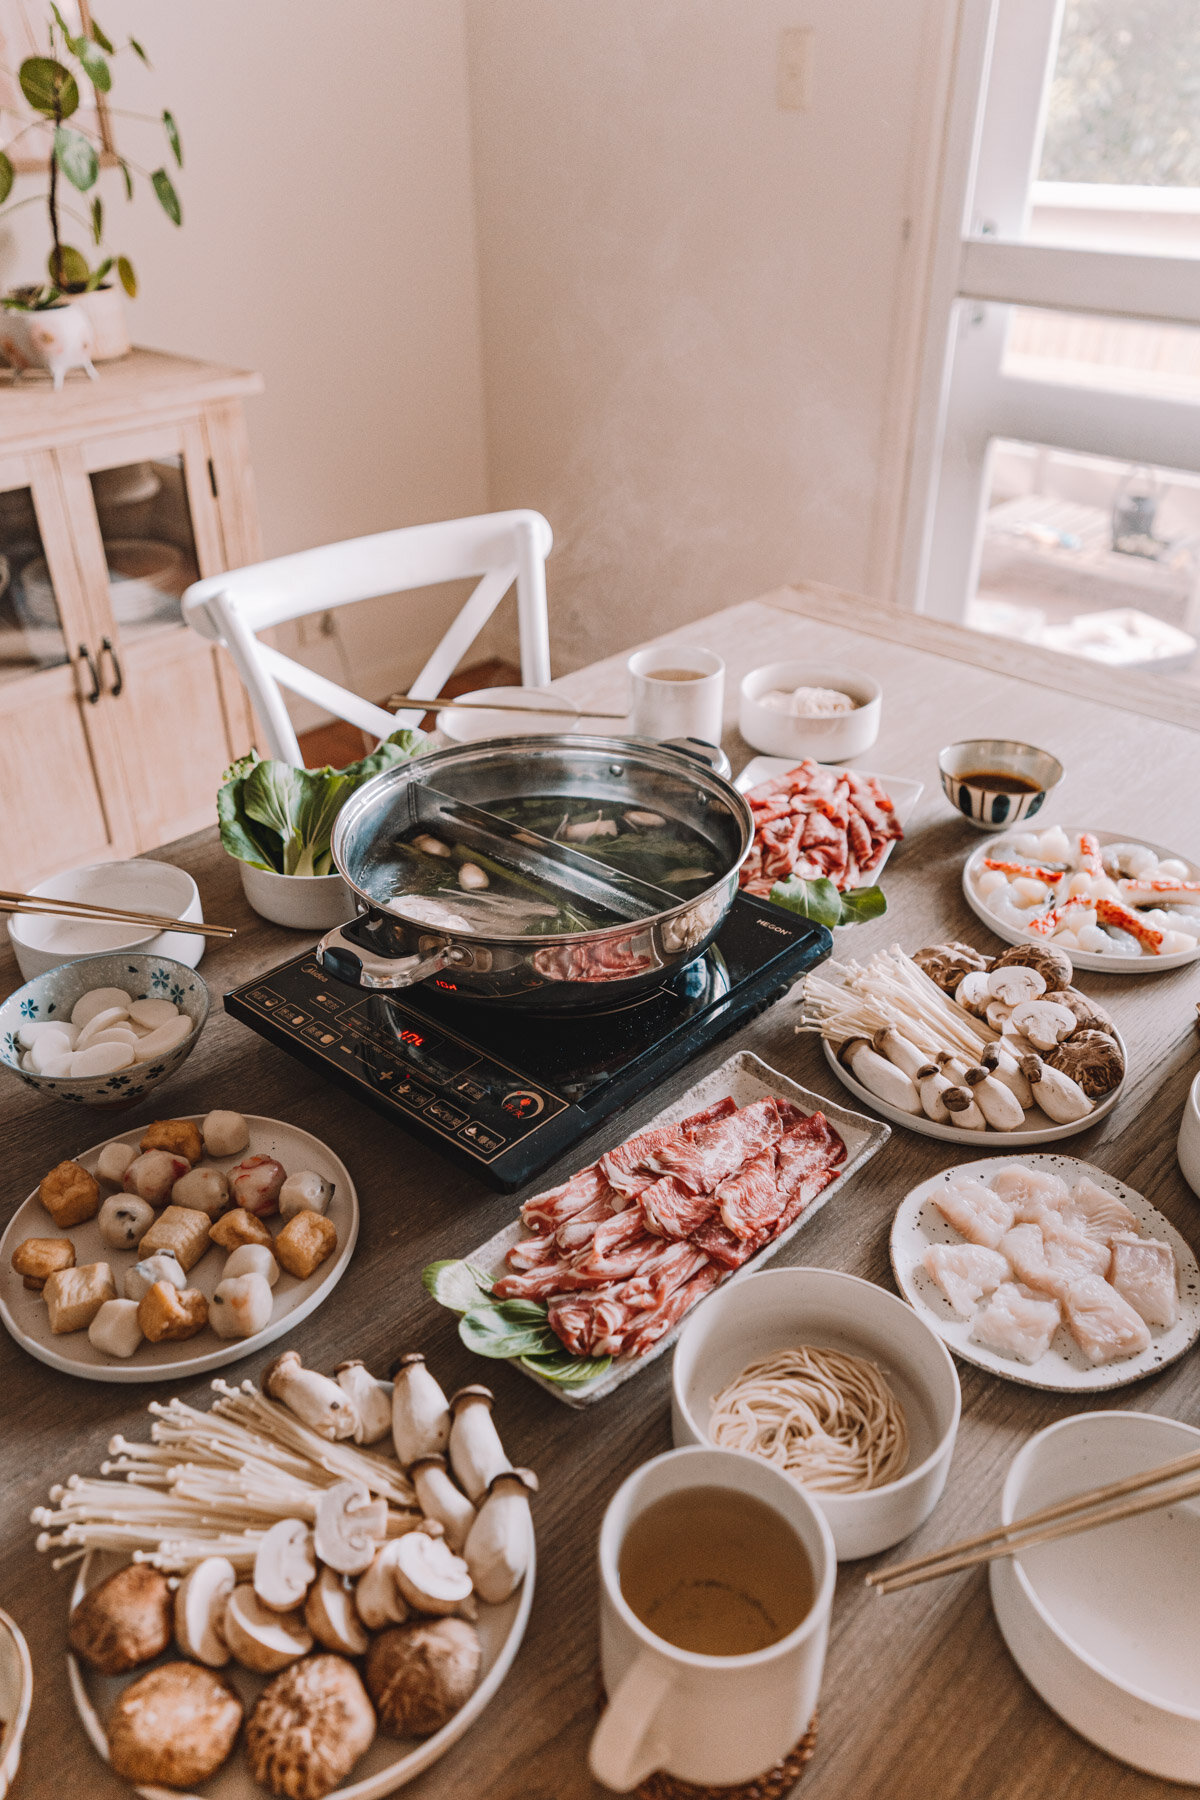 The Ultimate Guide to Making Hot Pot at Home